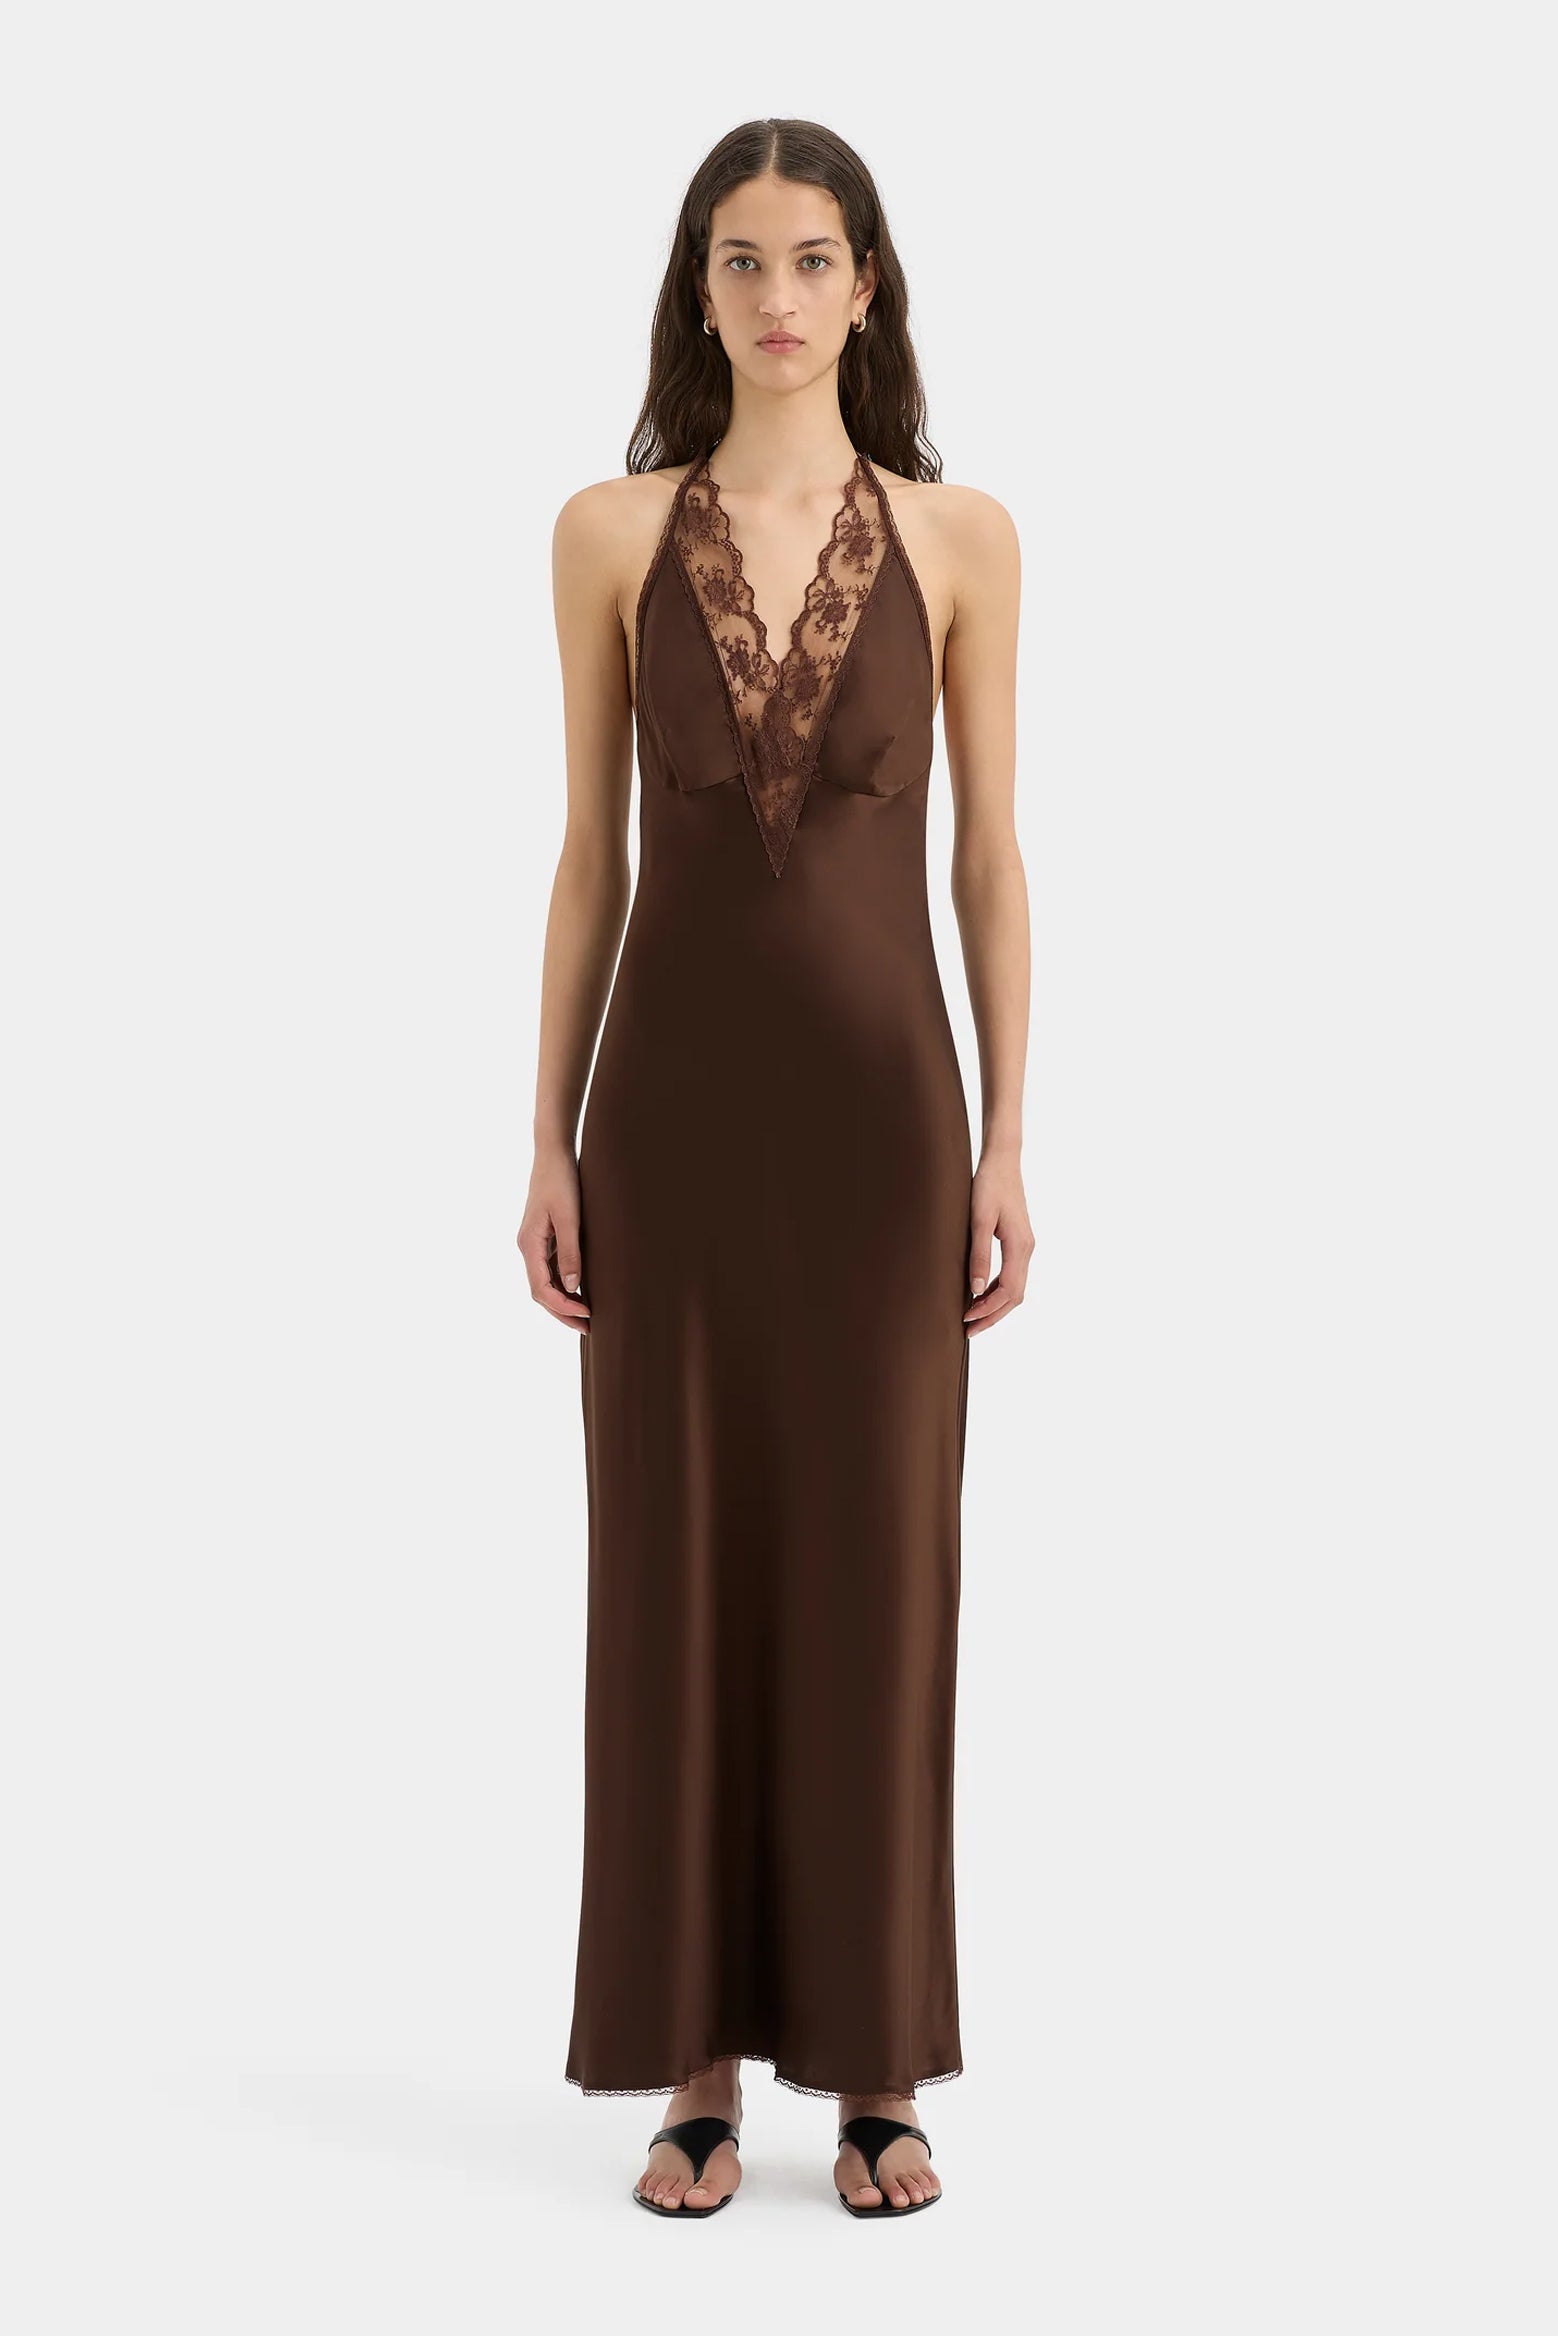 SIR Aries Halter Gown in Chocolate available at The New Trend Australia.